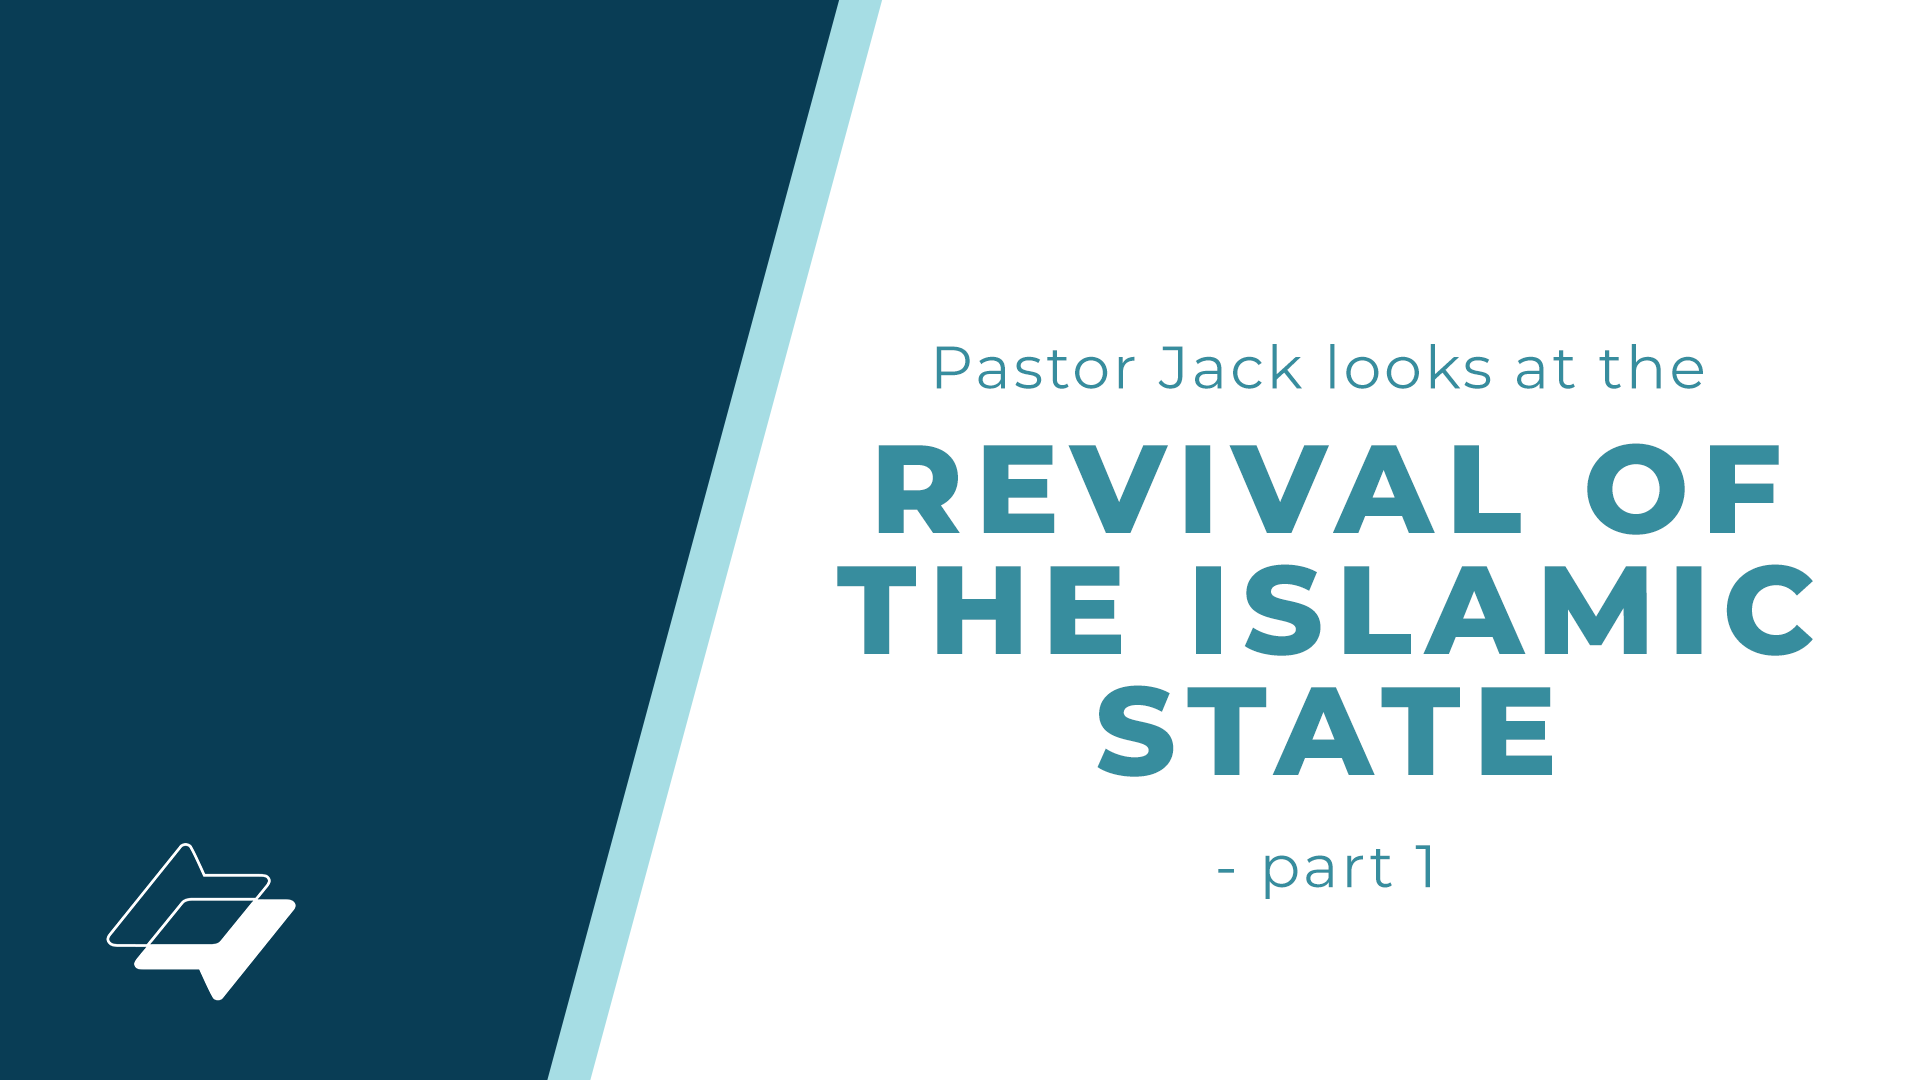 Pastor Jack looks at the Revival of the Islamic State – Part 1